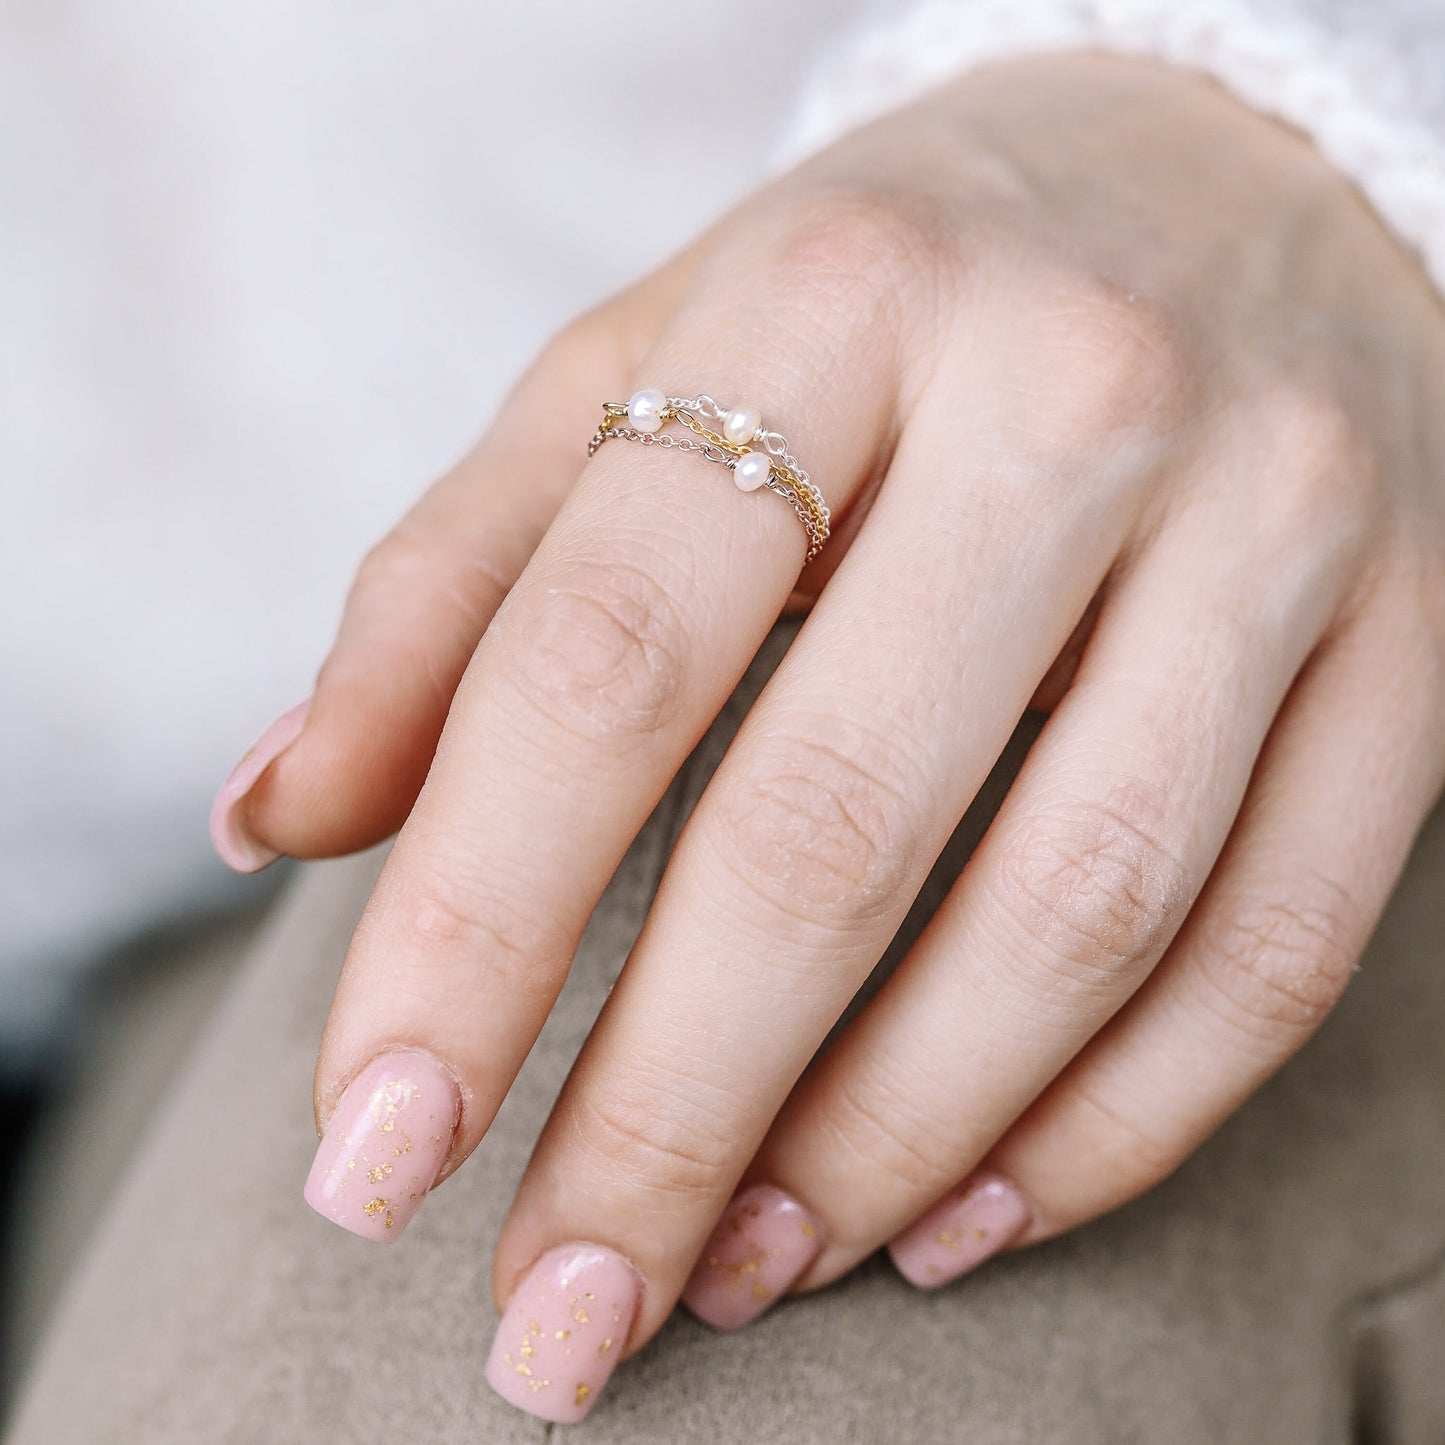 Tiny Pearl Chain Ring Simple Delicate Ring Dainty 18k gold plated Ring Thin Stack Chain Ring Minimalist Chain Ring Freshwater Pearl Ring